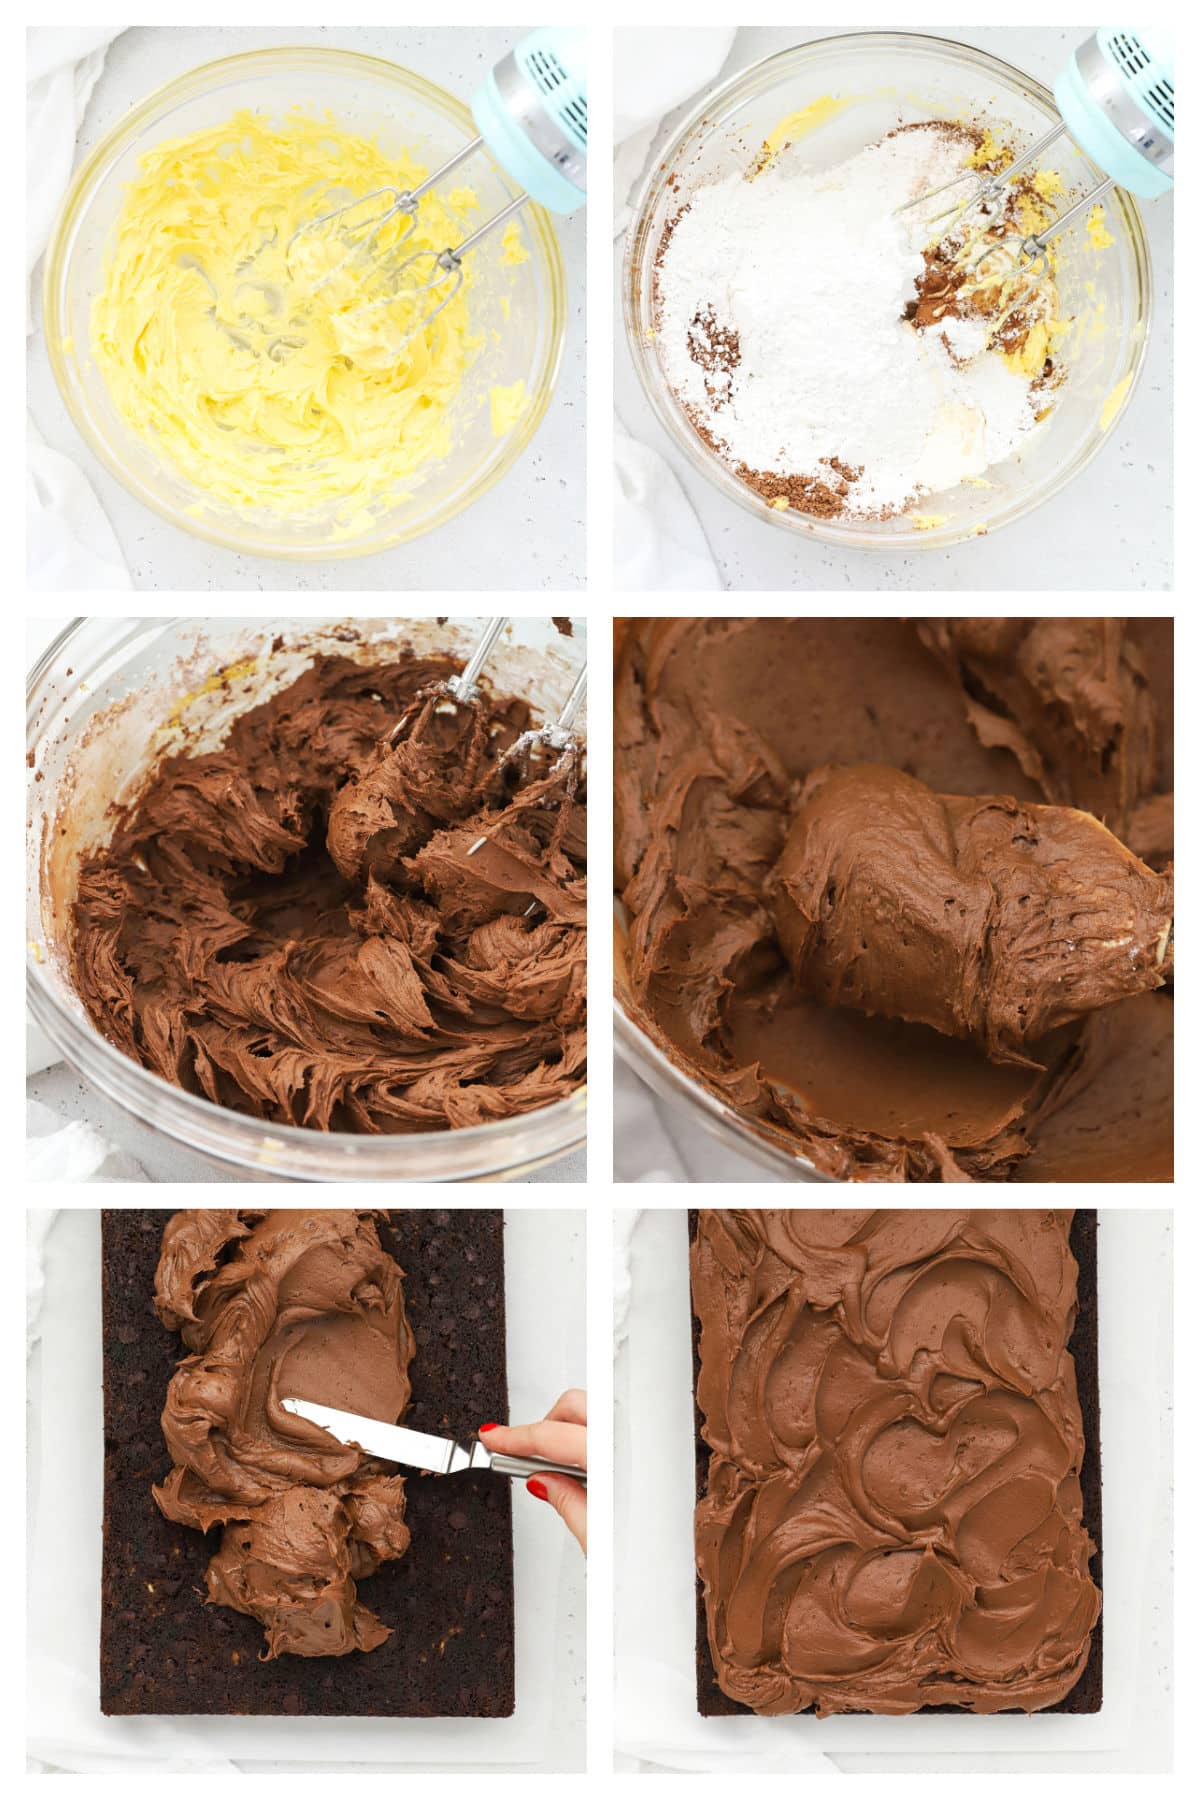 Making chocolate frosting for zucchini cake, step by step